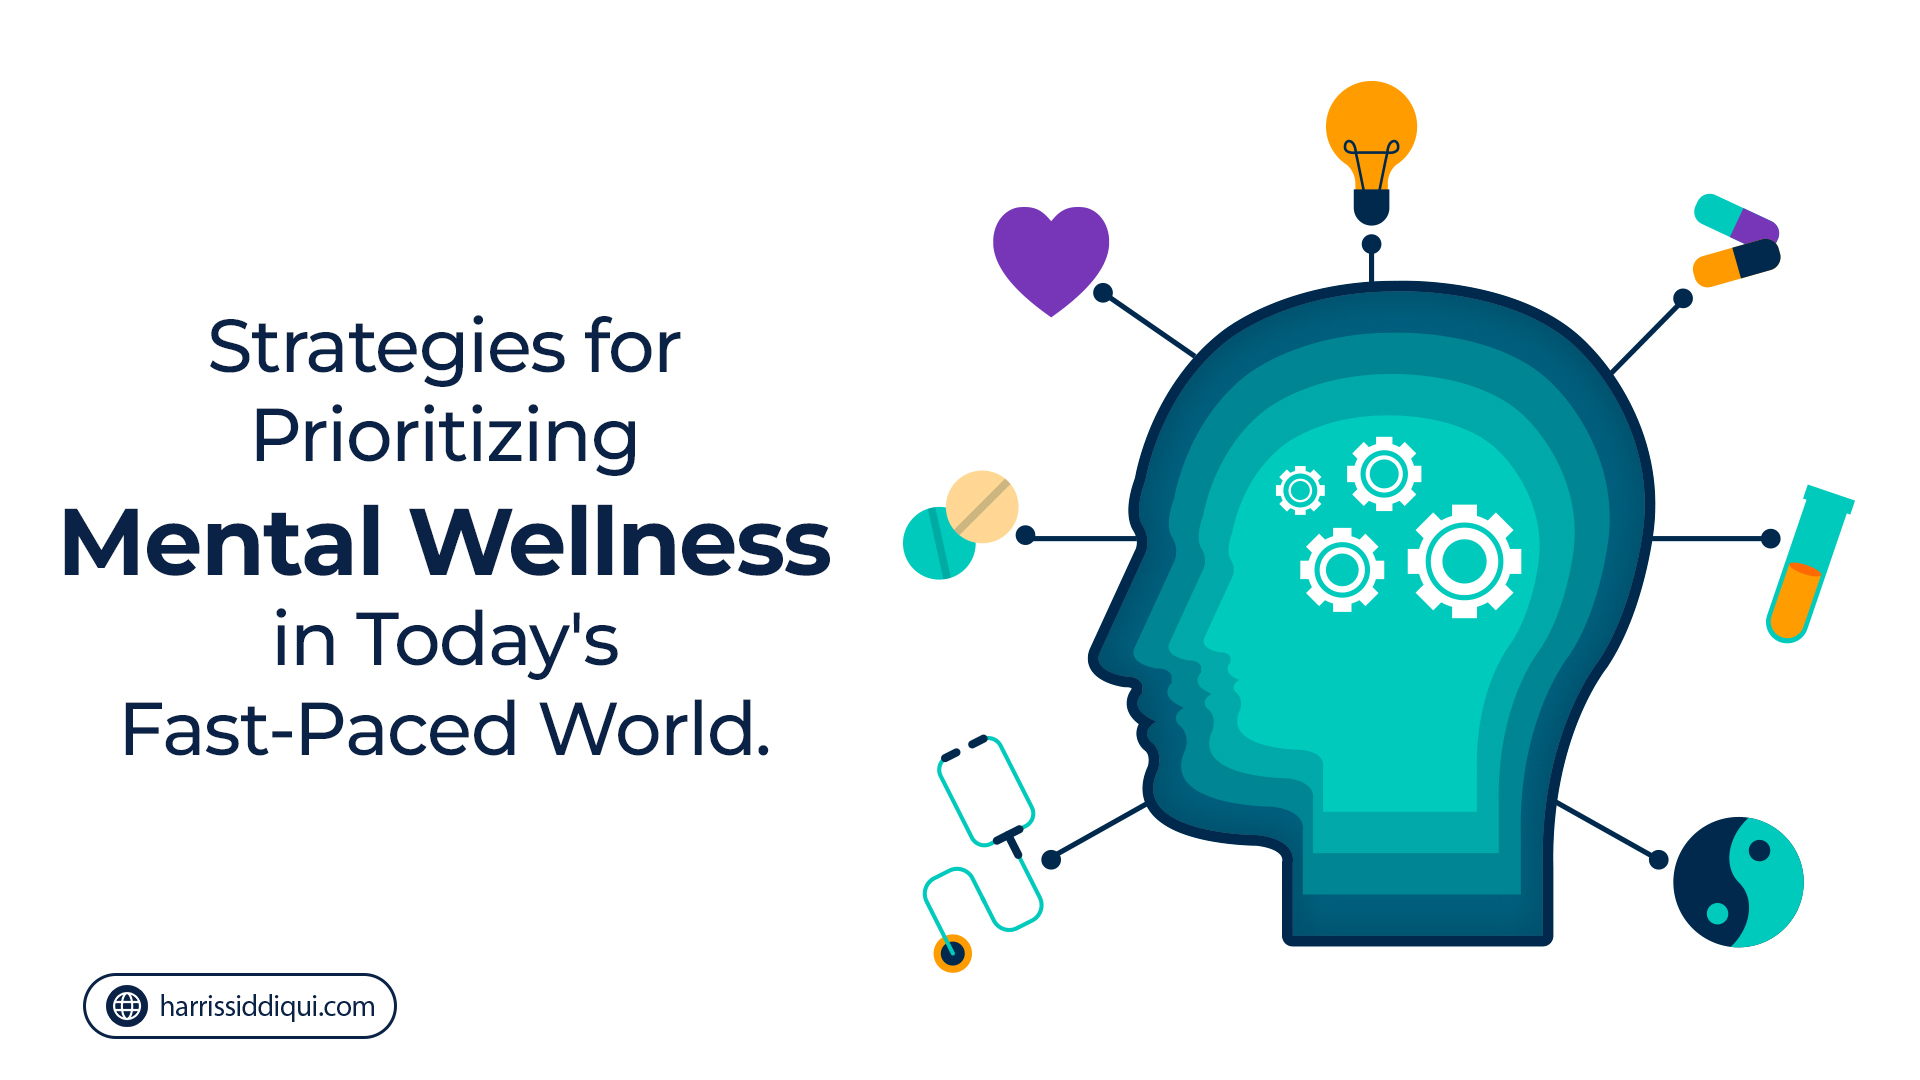 Strategies for Prioritizing Mental Wellness in Today’s Fast-Paced World